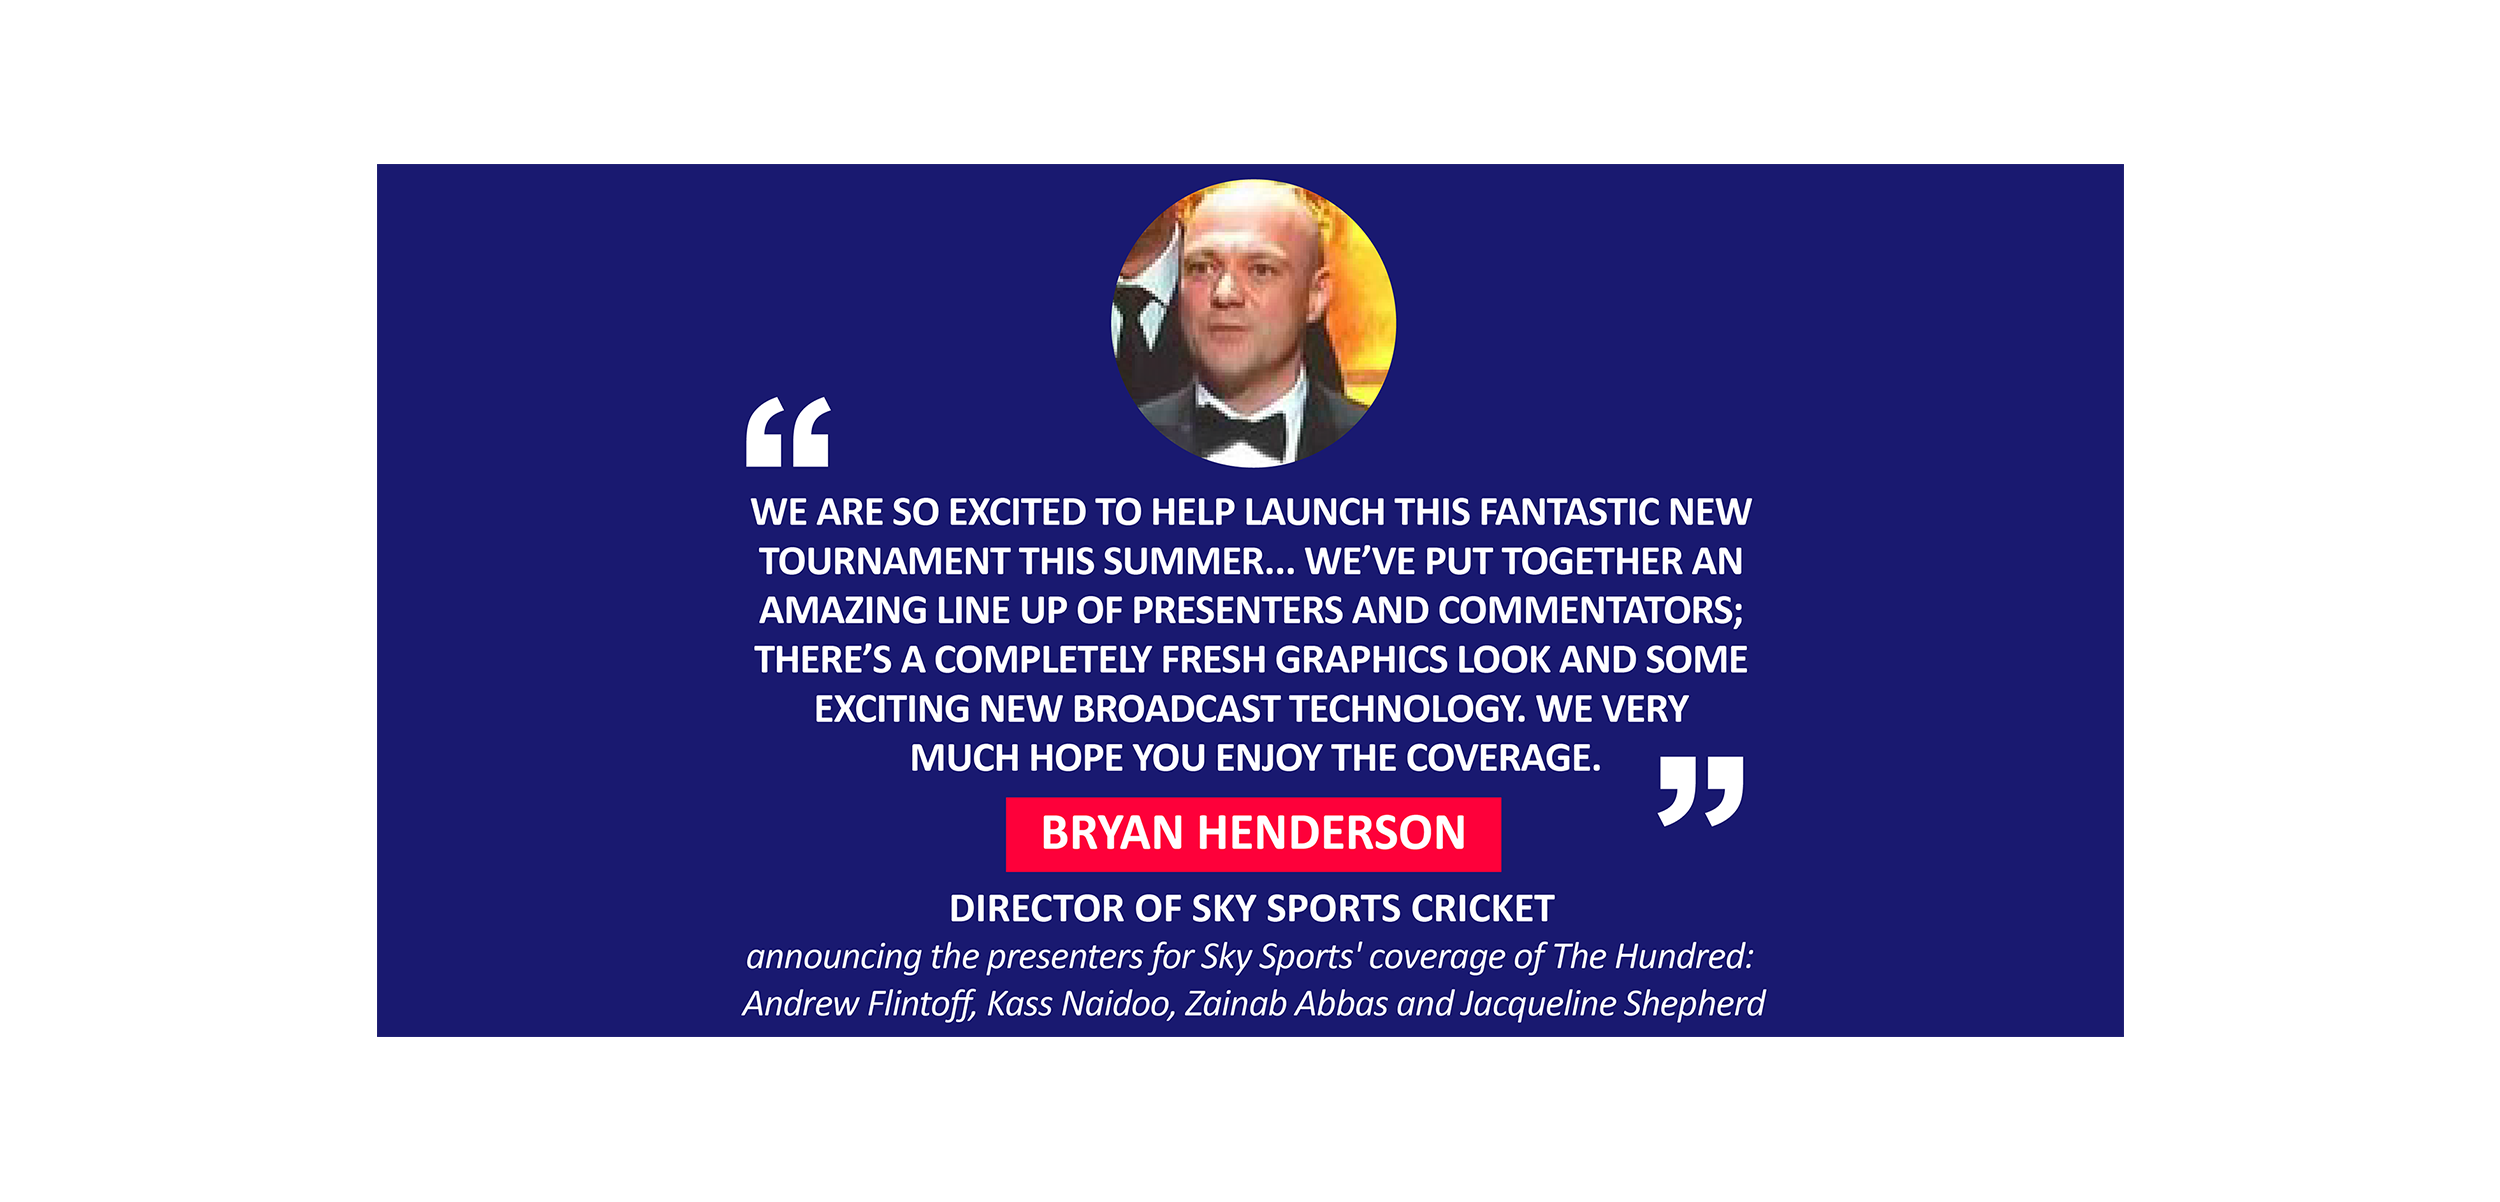 Bryan Henderson, Director of Sky Sports Cricket announcing the presenters for Sky Sports' coverage of The Hundred: Andrew Flintoff, Kass Naidoo, Zainab Abbas and Jacqueline Shepherd